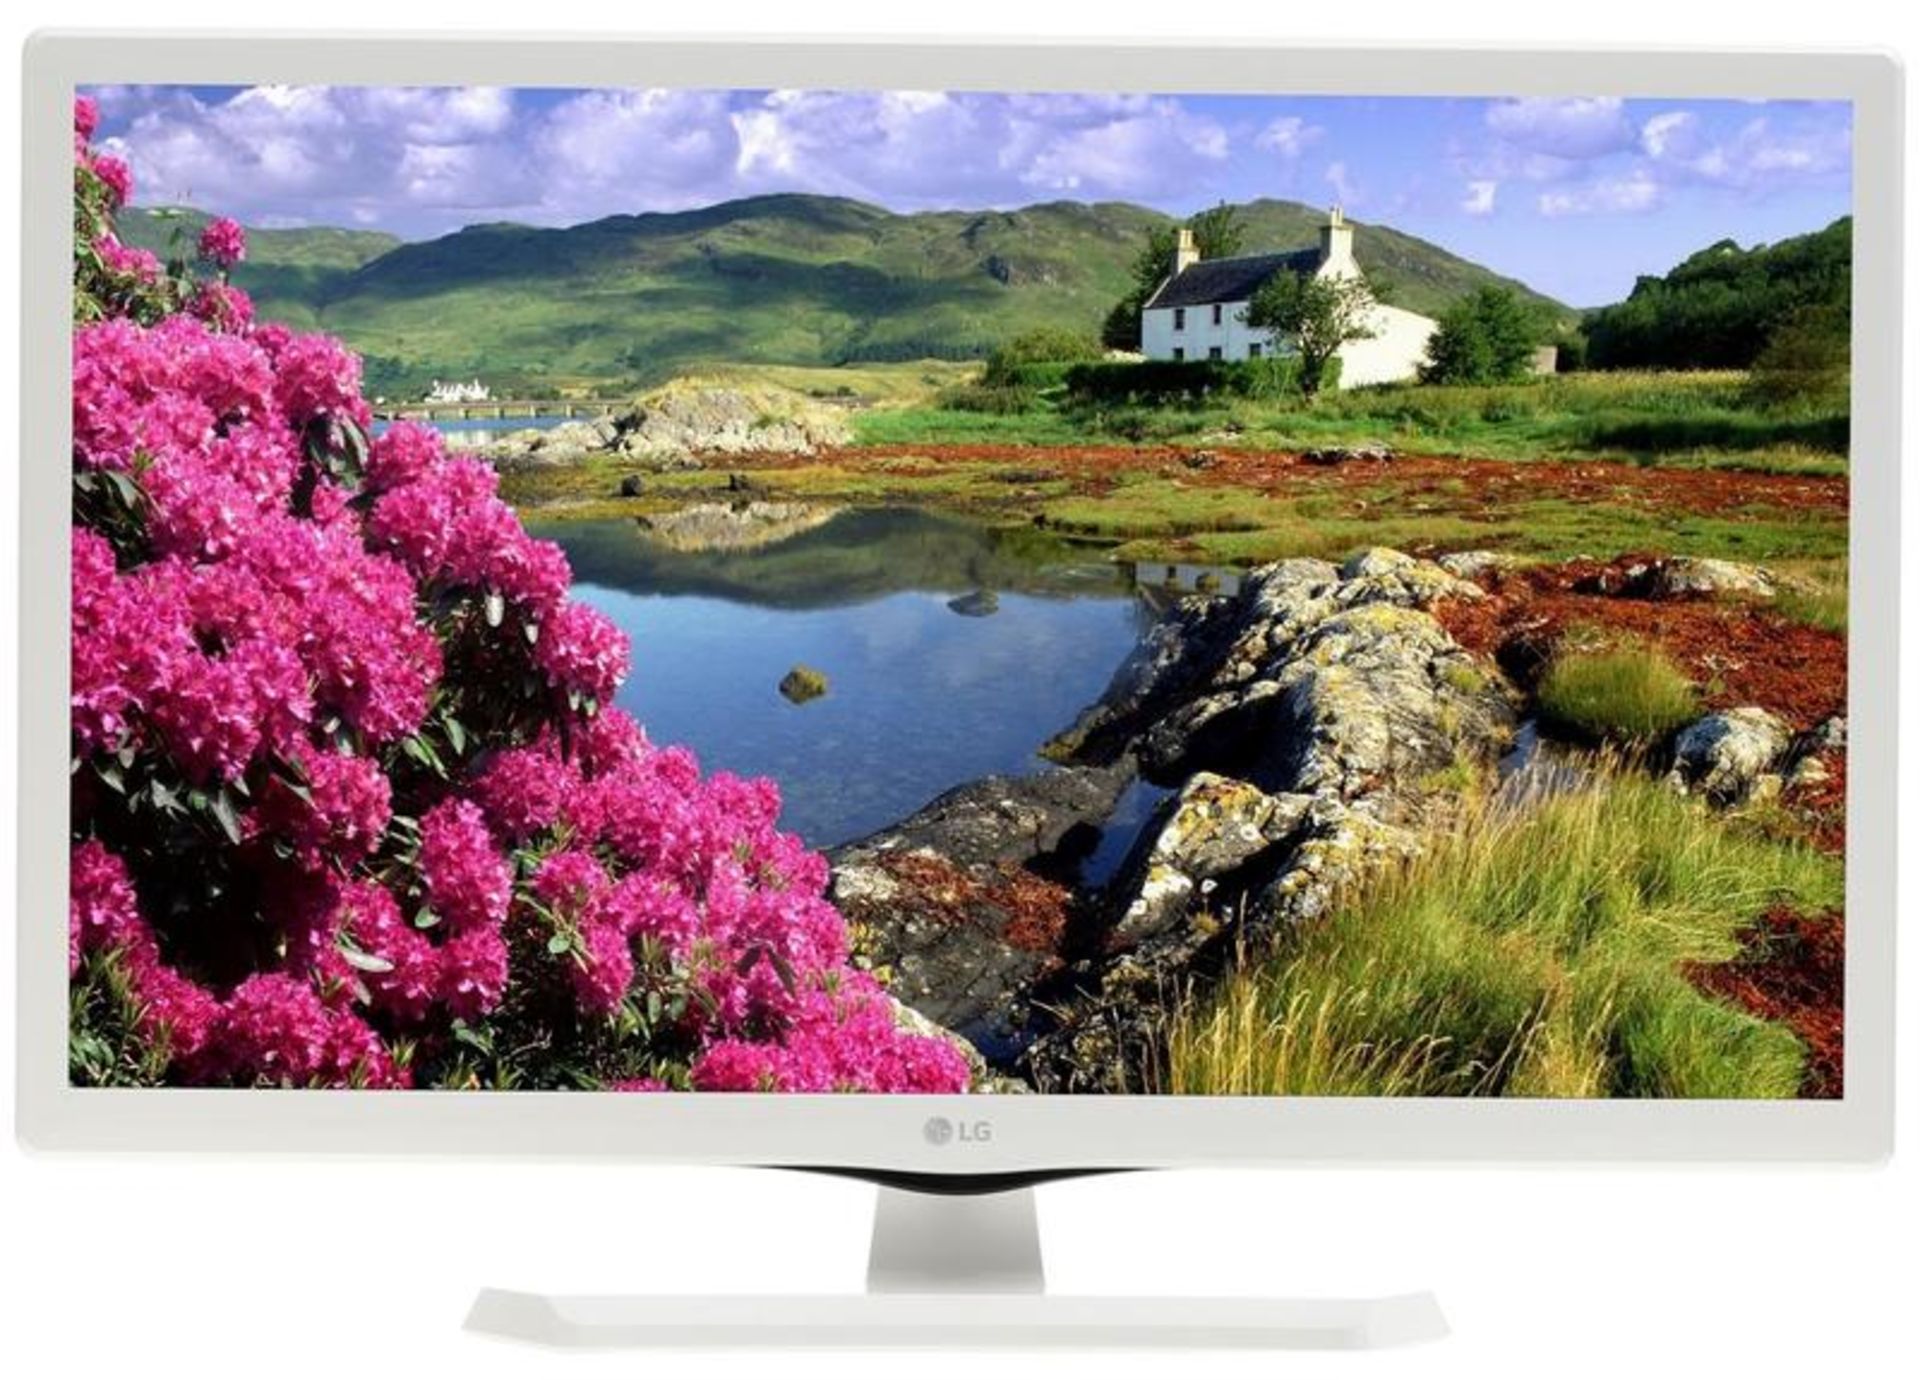 V Grade A LG 24 Inch HD READY LED TV WITH FREEVIEW - WHITE 24MT48VW-WZ